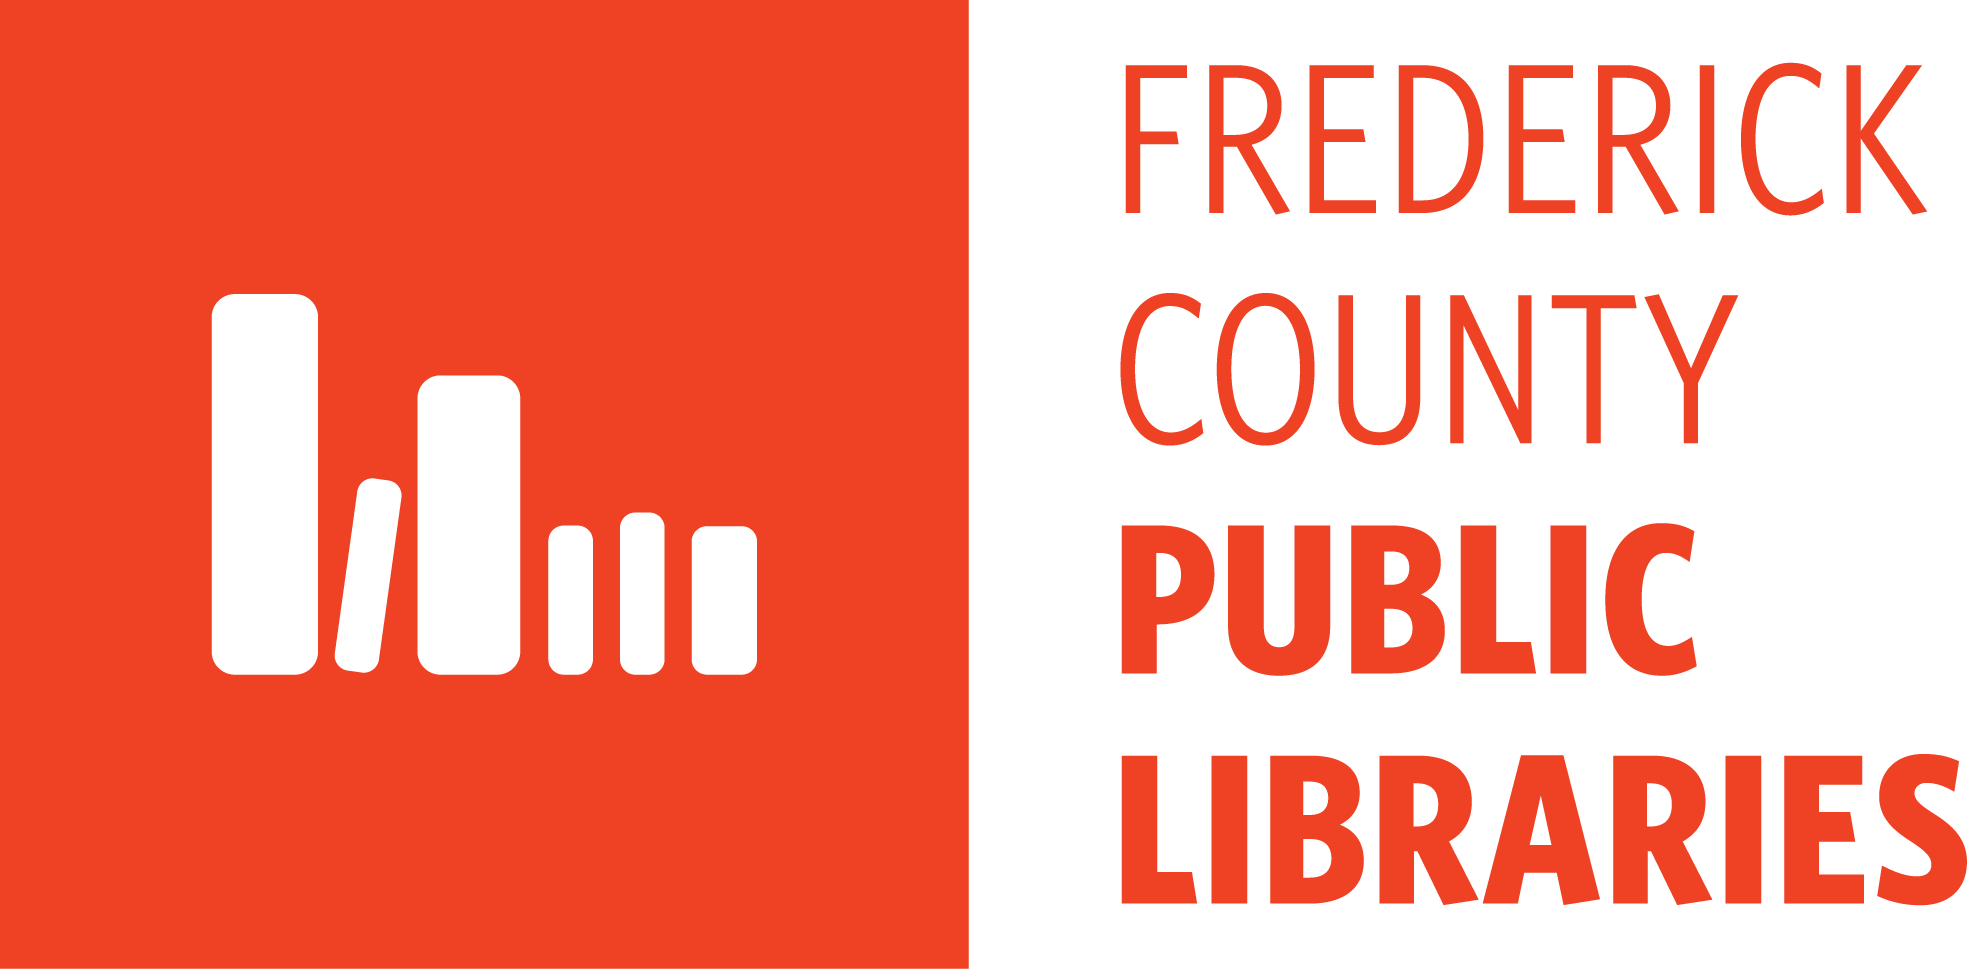 Public Libraries In Frederick County To Resume Normal Operating Hours On Saturday